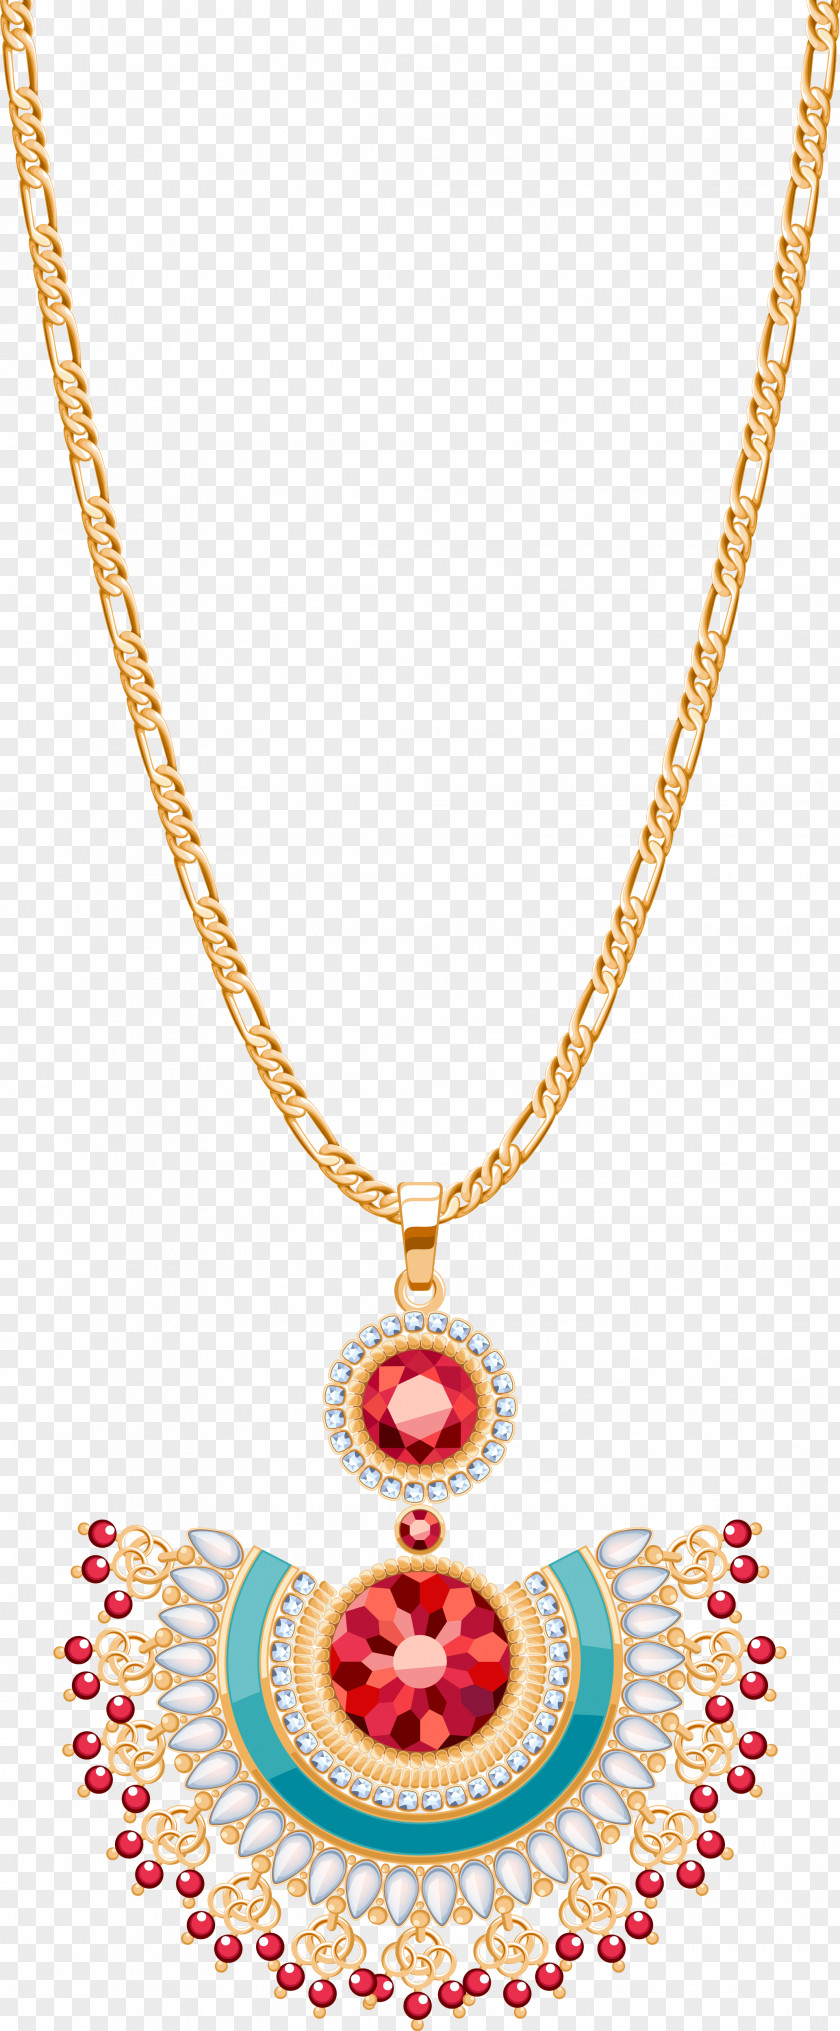 Ruby Necklace Earring Chain Pearl PNG